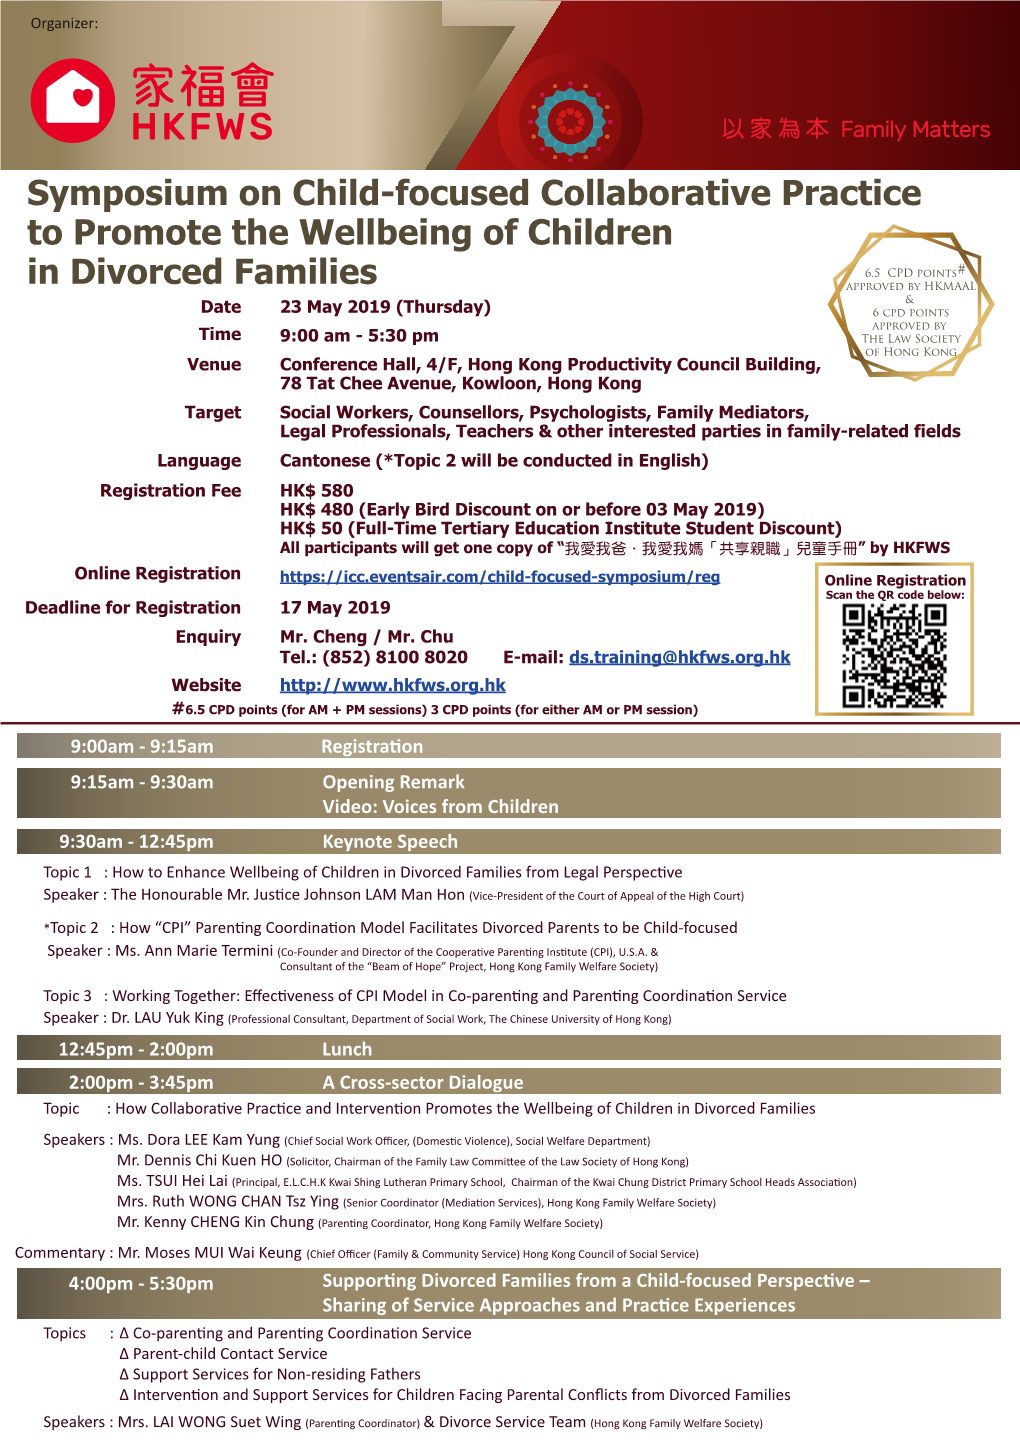 Symposium on Child-Focused Collaborative Practice to Promote the Wellbeing of Children